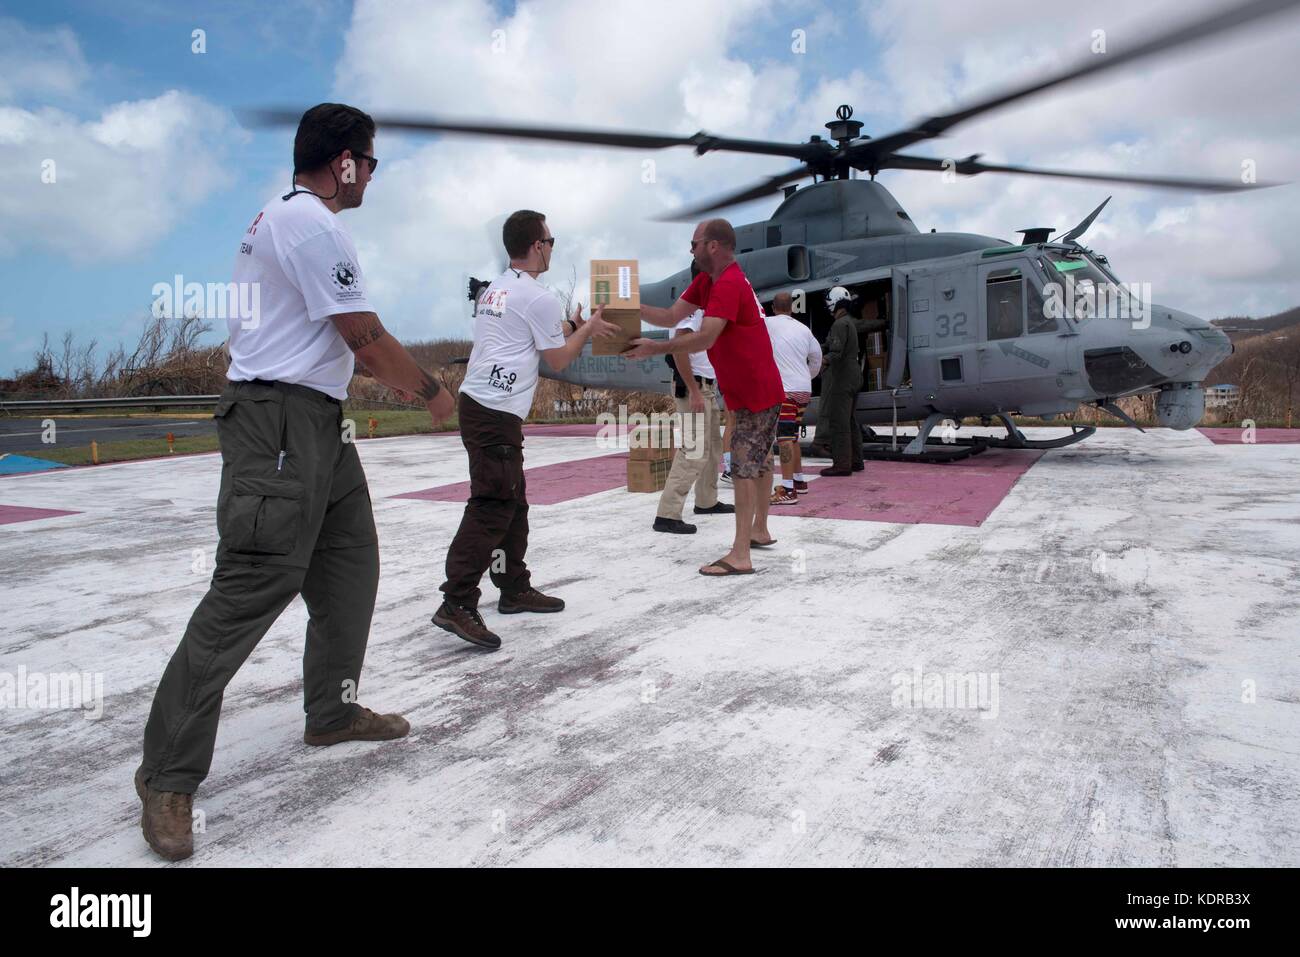 U.S. Marines and volunteers unload emergency supplies from a U.S. Marine Corps UH-1Y Venom Super Huey helicopter during relief efforts in the aftermath of Hurricane Irma September 11, 2017 in St. John, U.S. Virgin Islands. Stock Photo